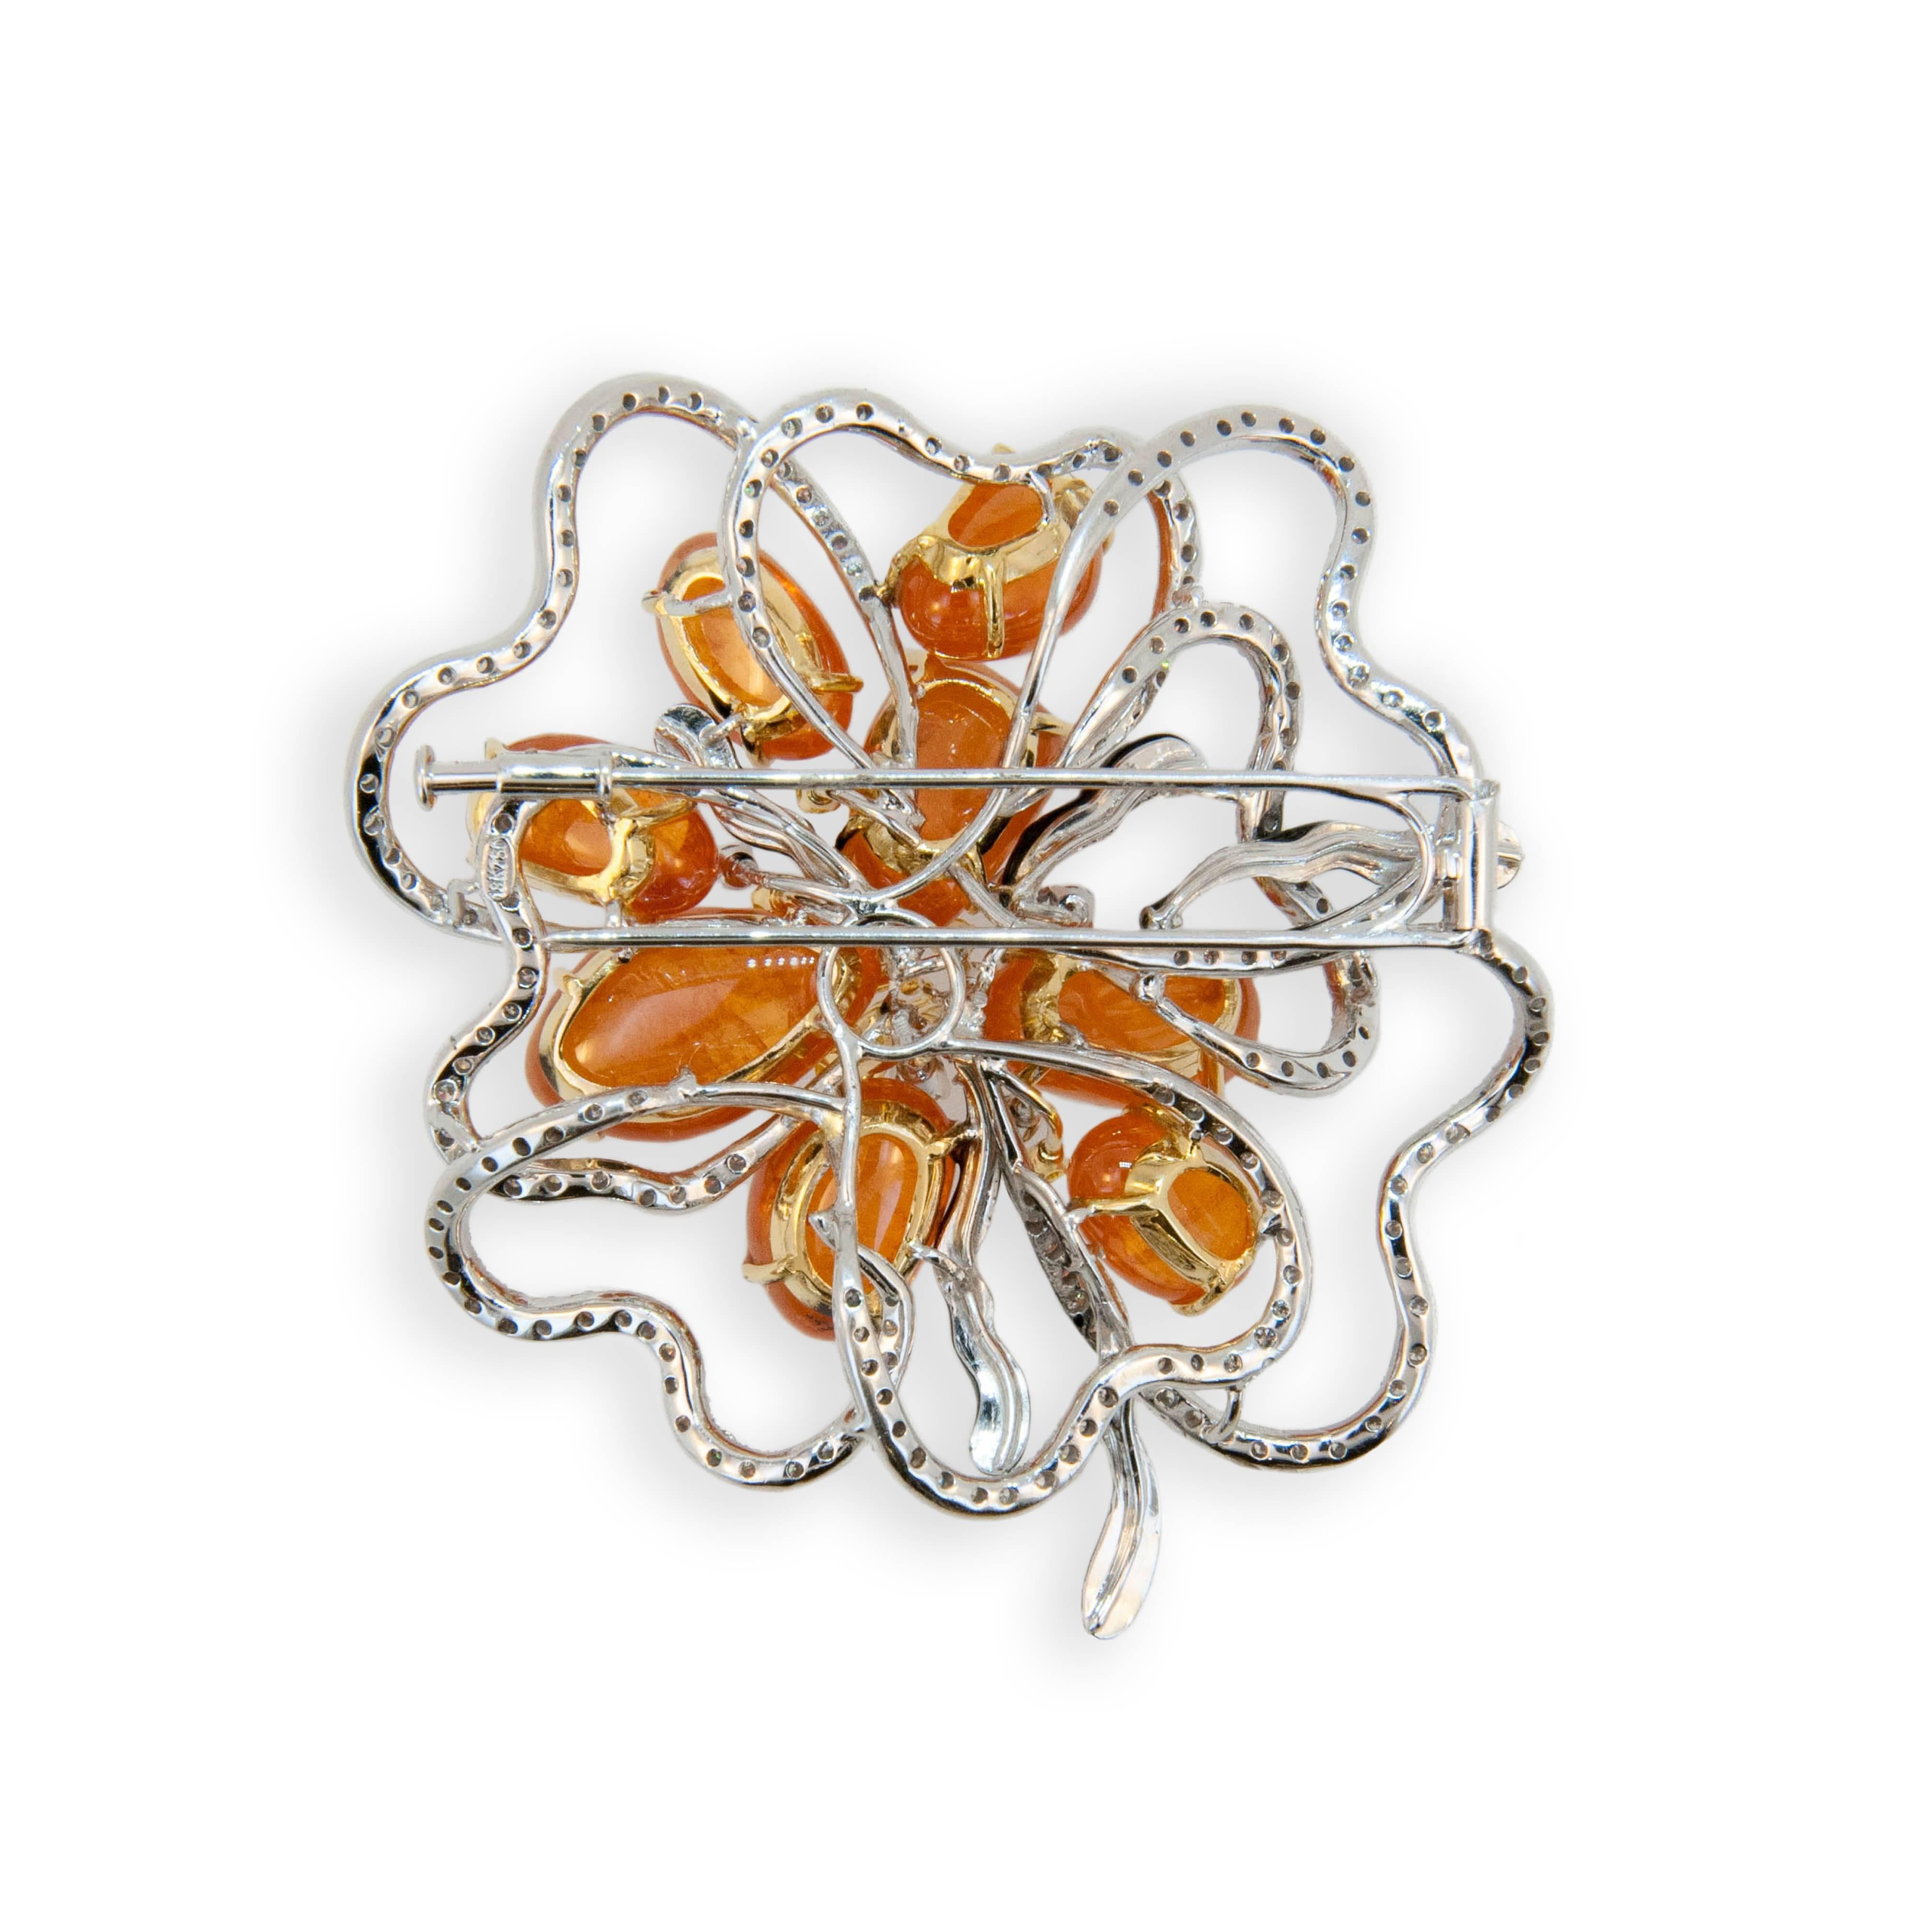 18 karat white and yellow gold brooch set with eight Mandarin Garnets 84.25 carats total weight. 214 Round Diamonds 3.07carat total weight. 8 yellow diamonds .40 carats total weight and five onyx and enamel freeform pieces.